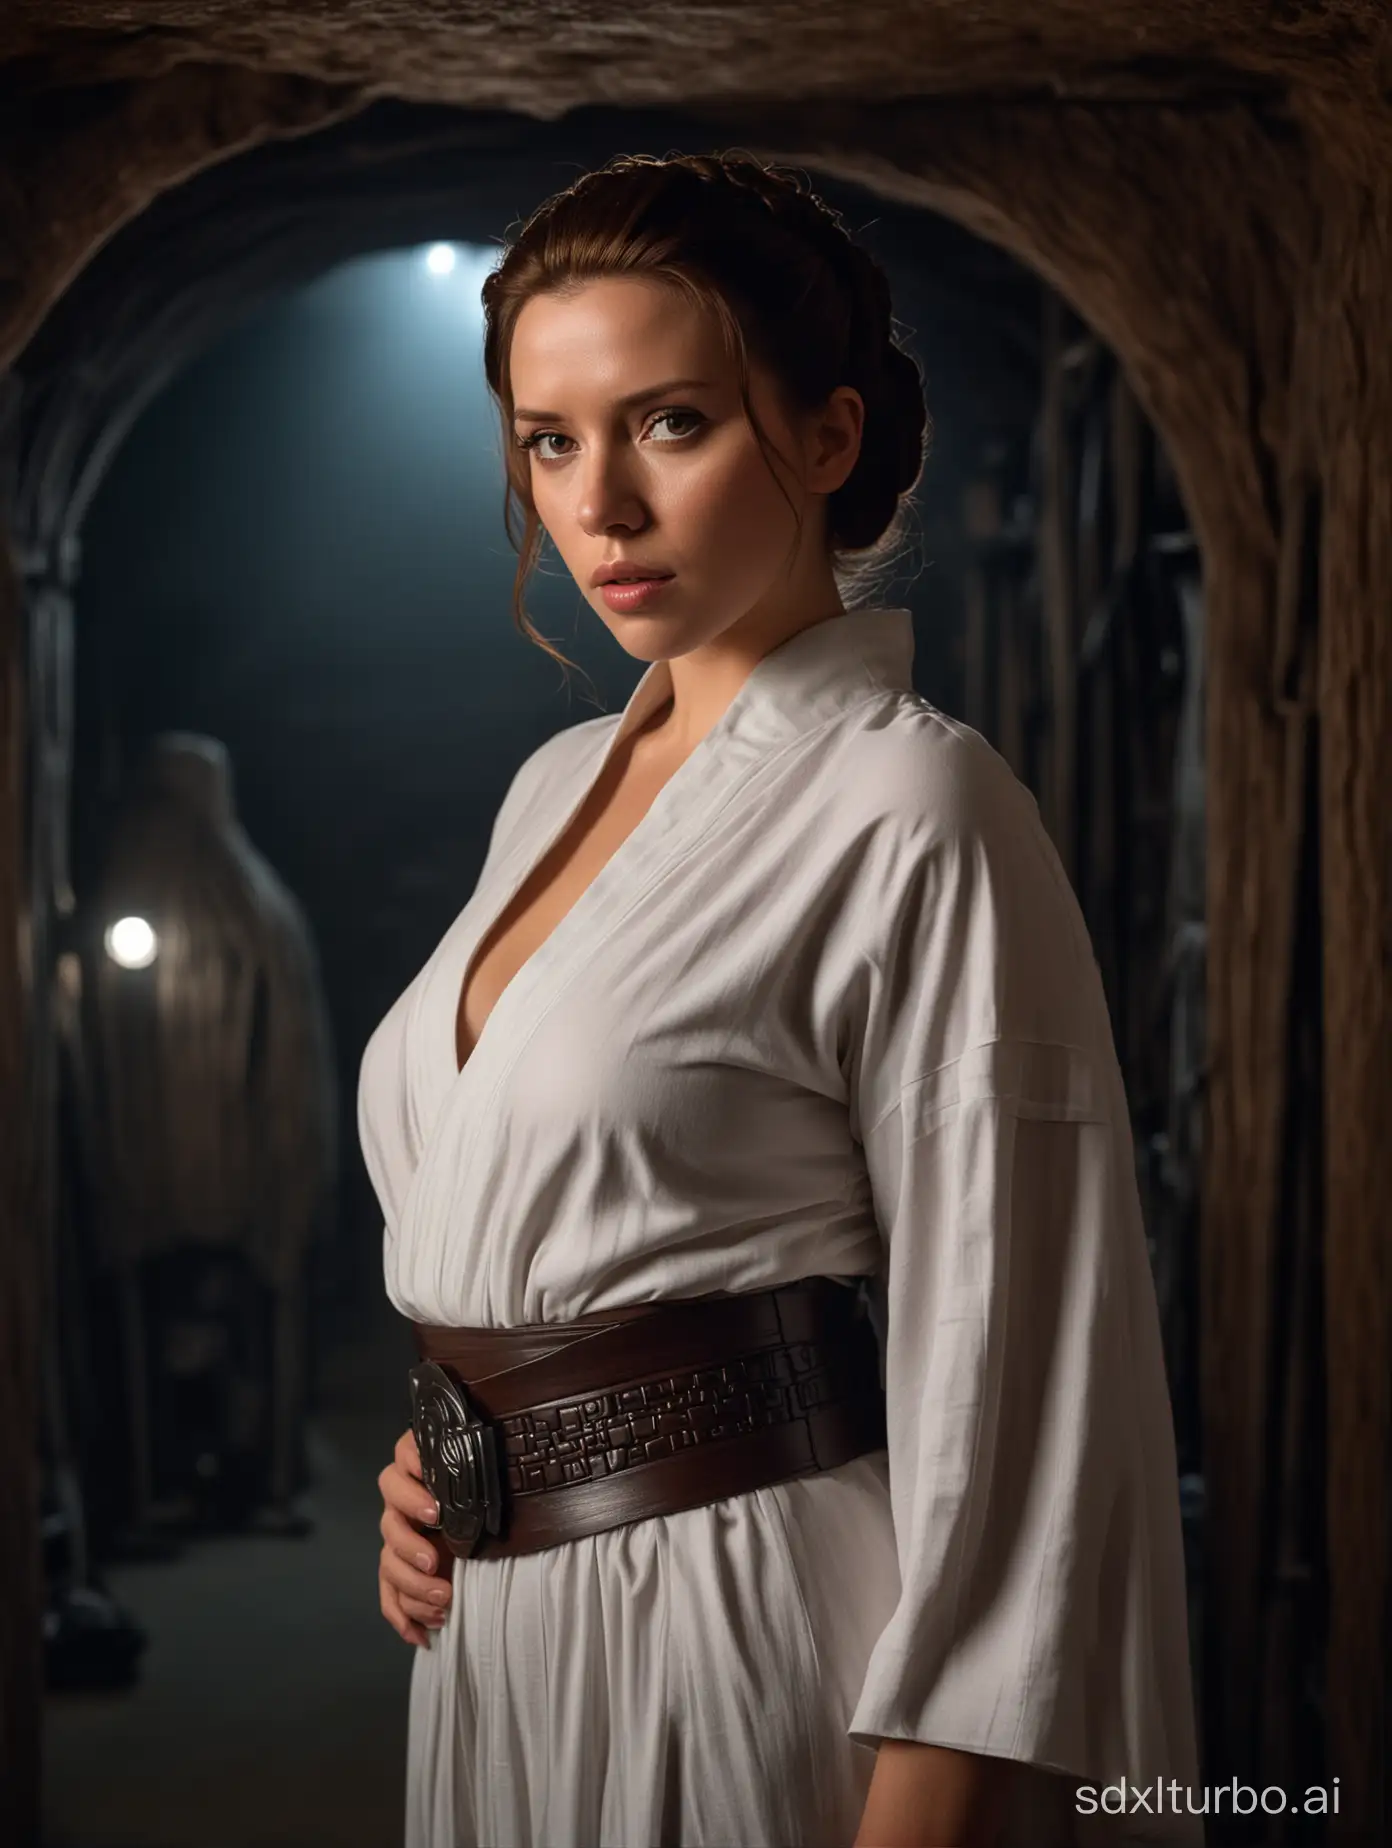 photography of (scarlet johansson) as Princess Leia, standing in a dark Jubba hut dungeon, professional shot, natural pose, closeup, portrait